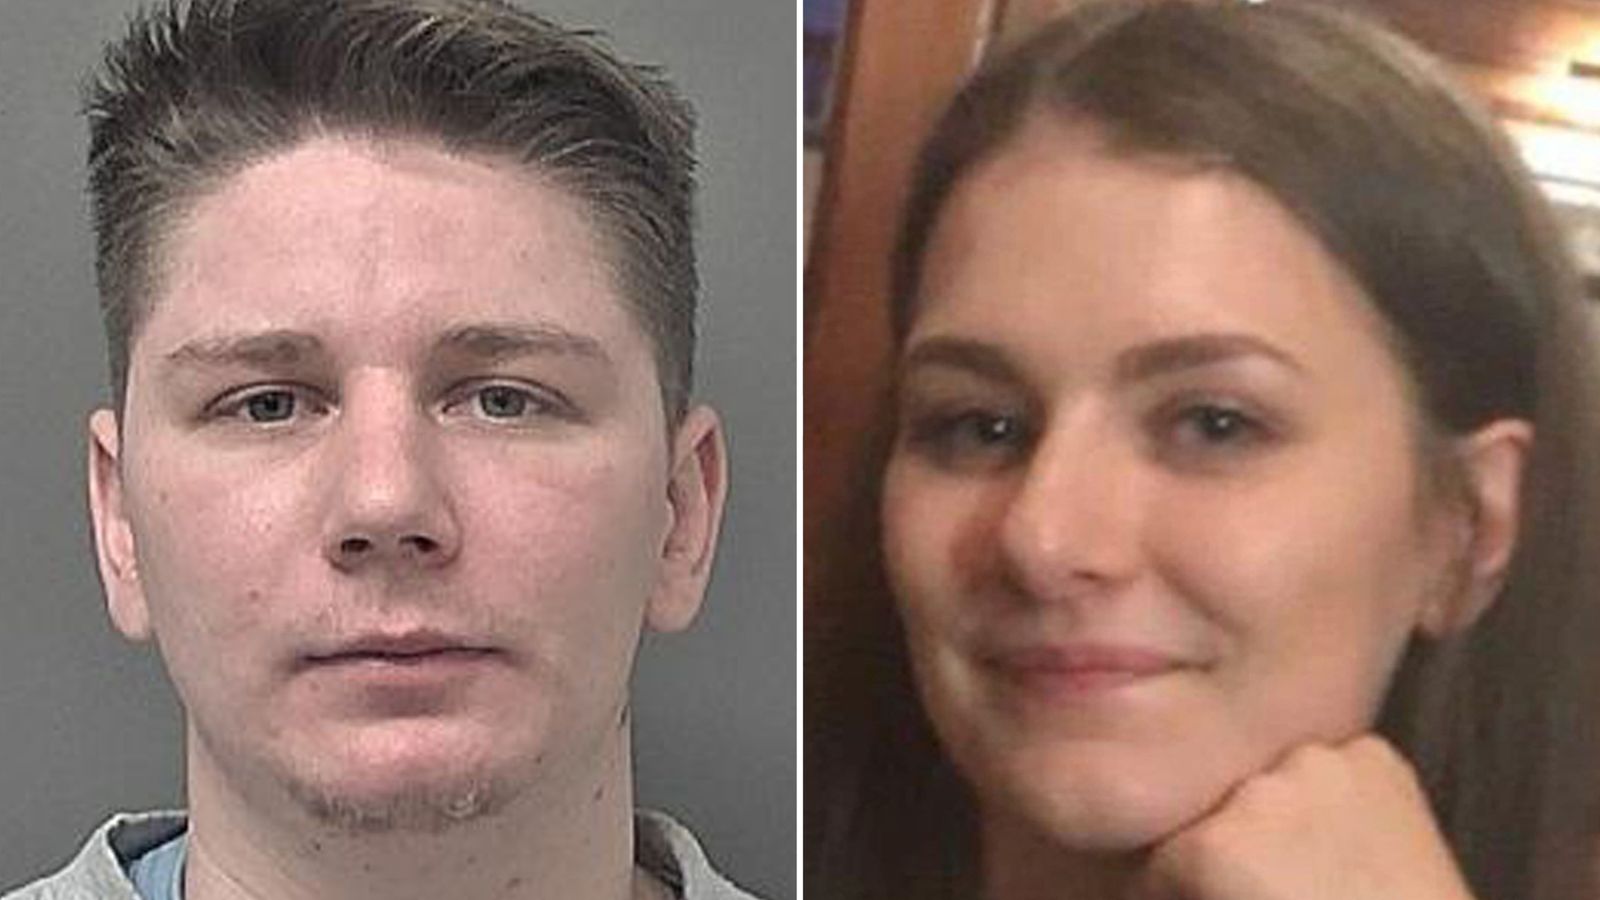 Libby Squire's killer Pawel Relowicz agrees to meet her mother